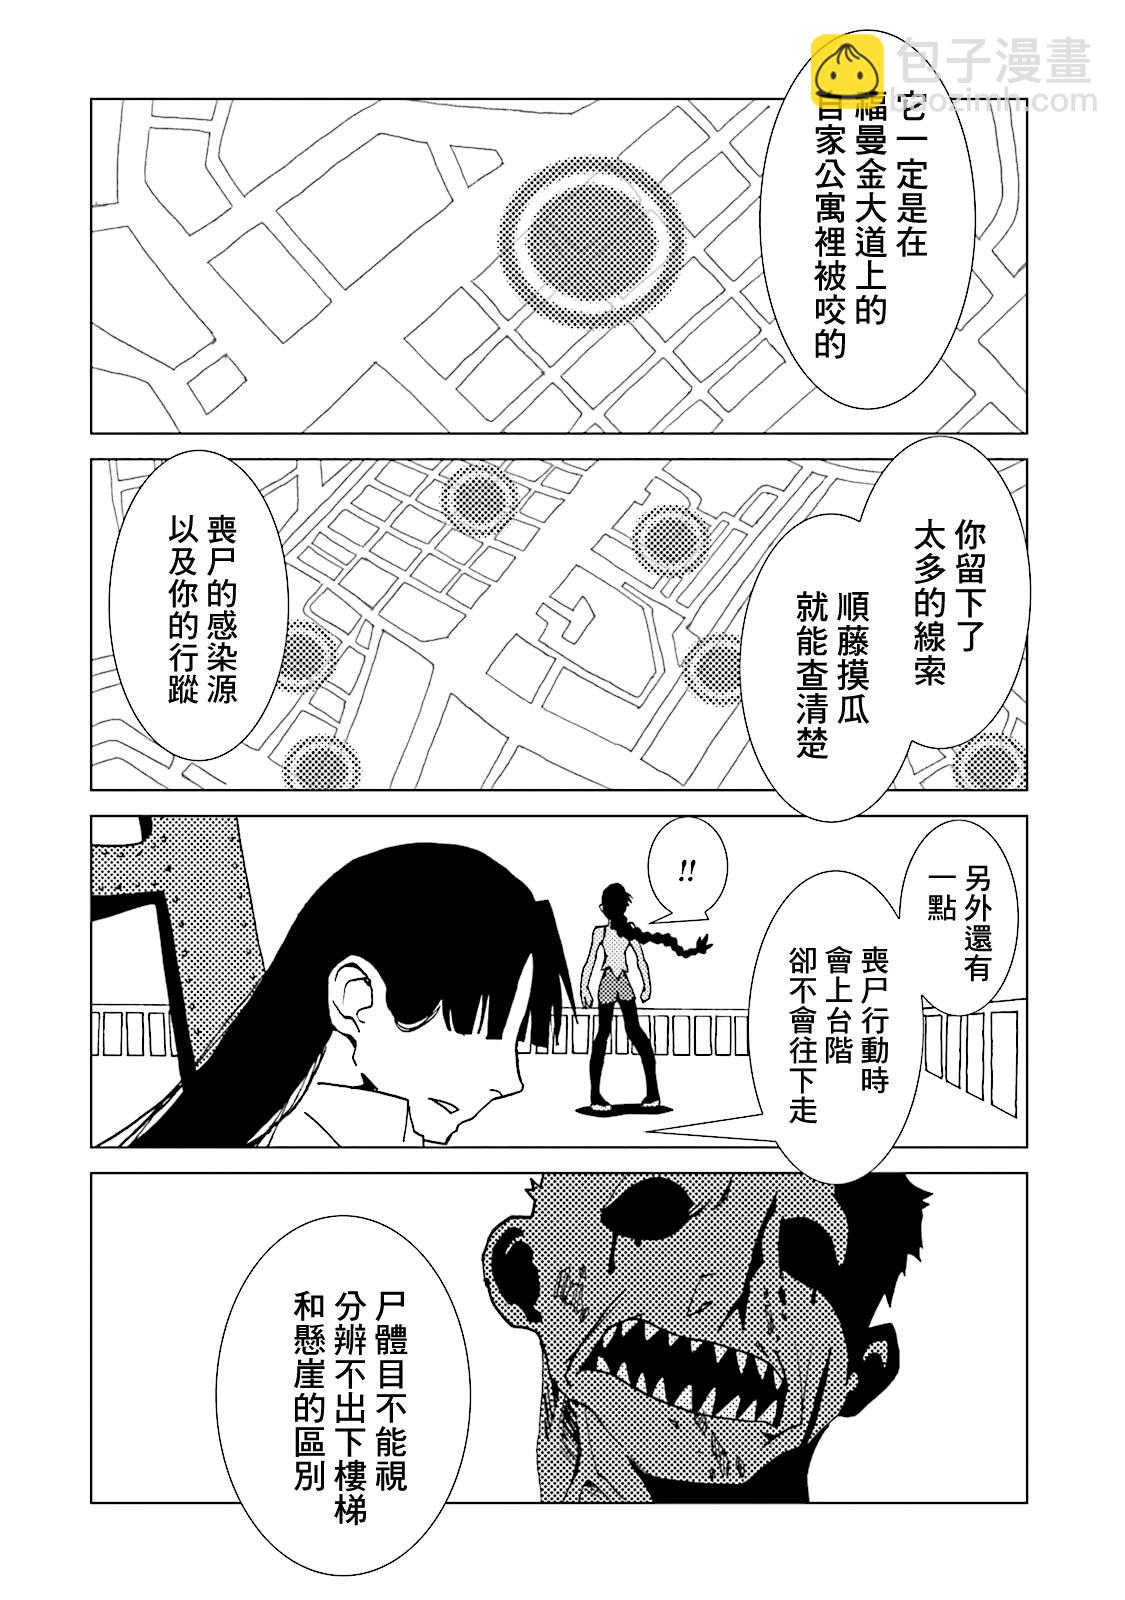 AREA51 - 第64话 - 3